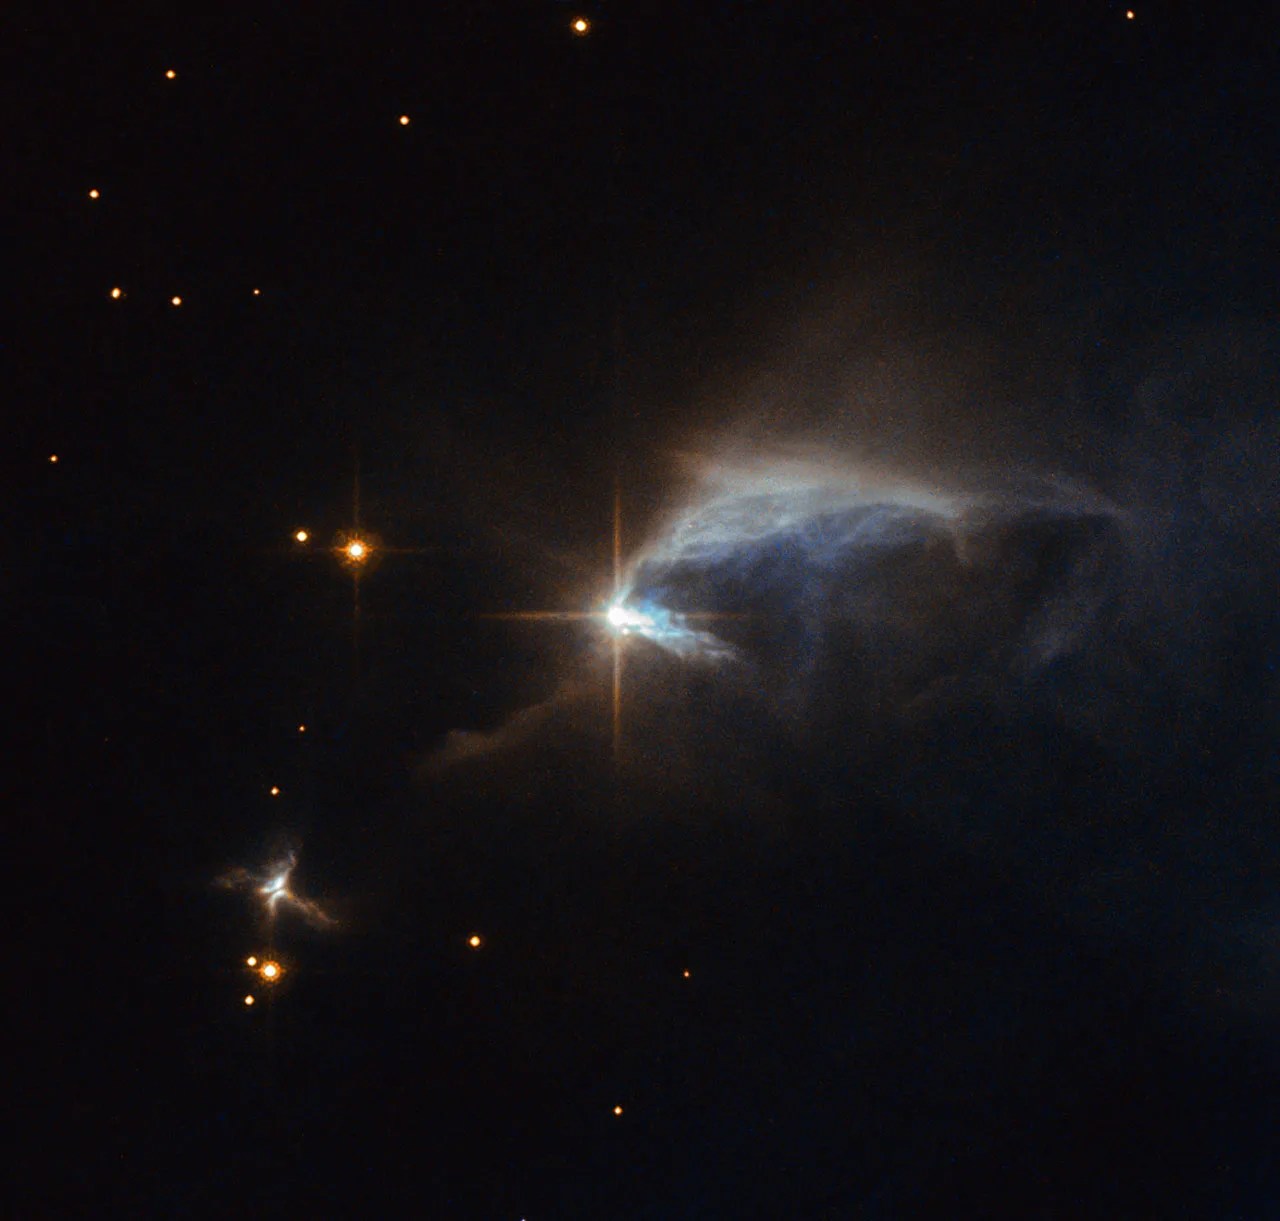 Surrounded by an envelope of dust, the subject of this hubble image is a young forming star